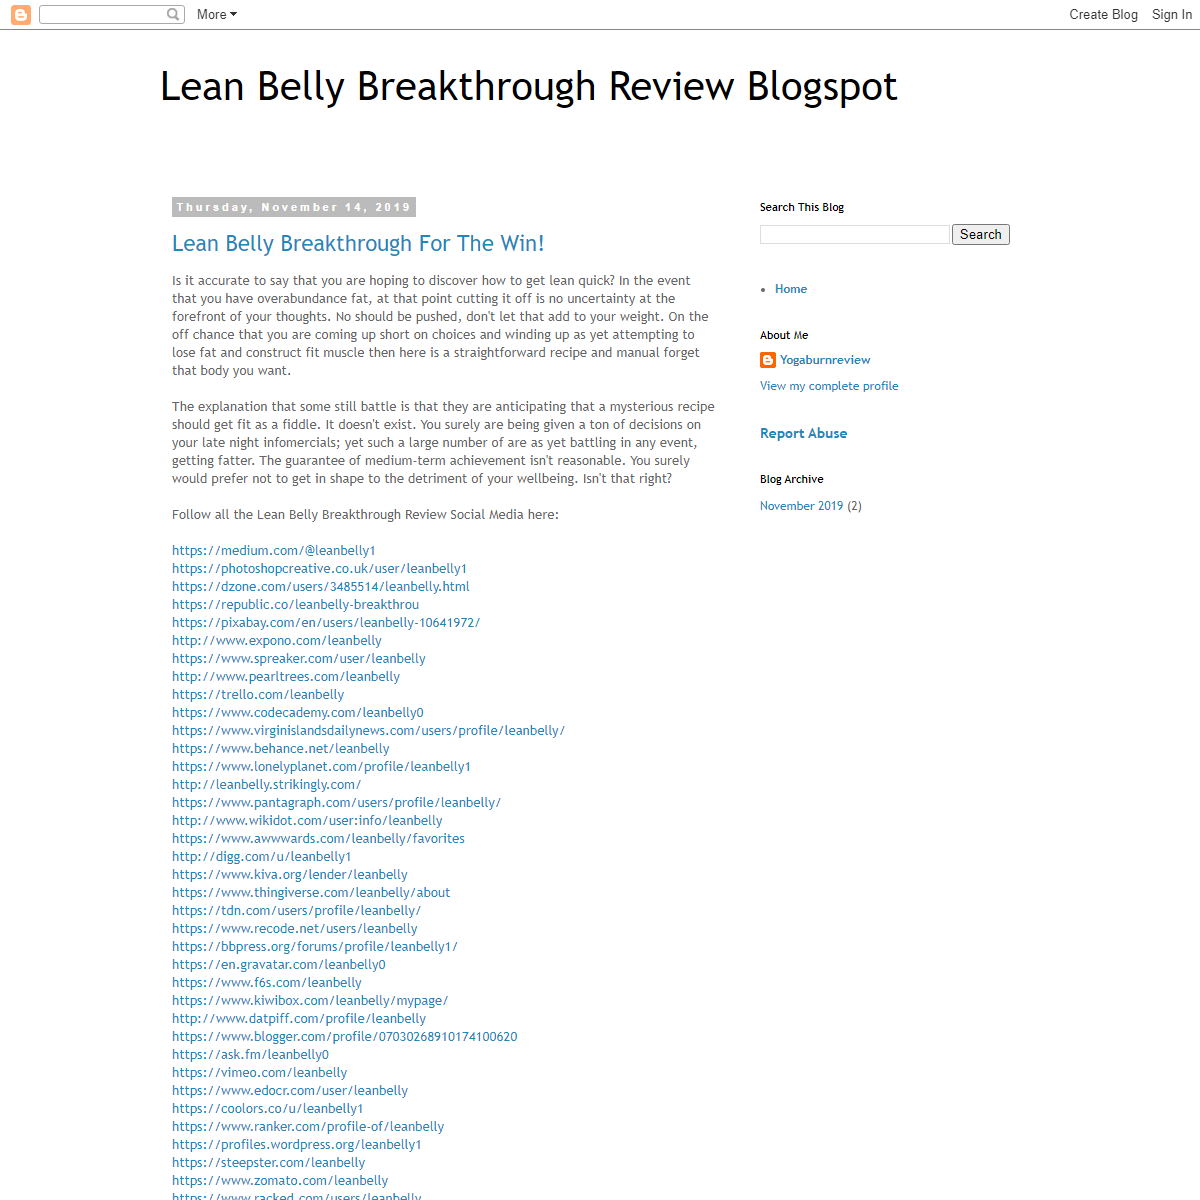 A complete backup of https://leanbellybreakthroughreview2.blogspot.com/